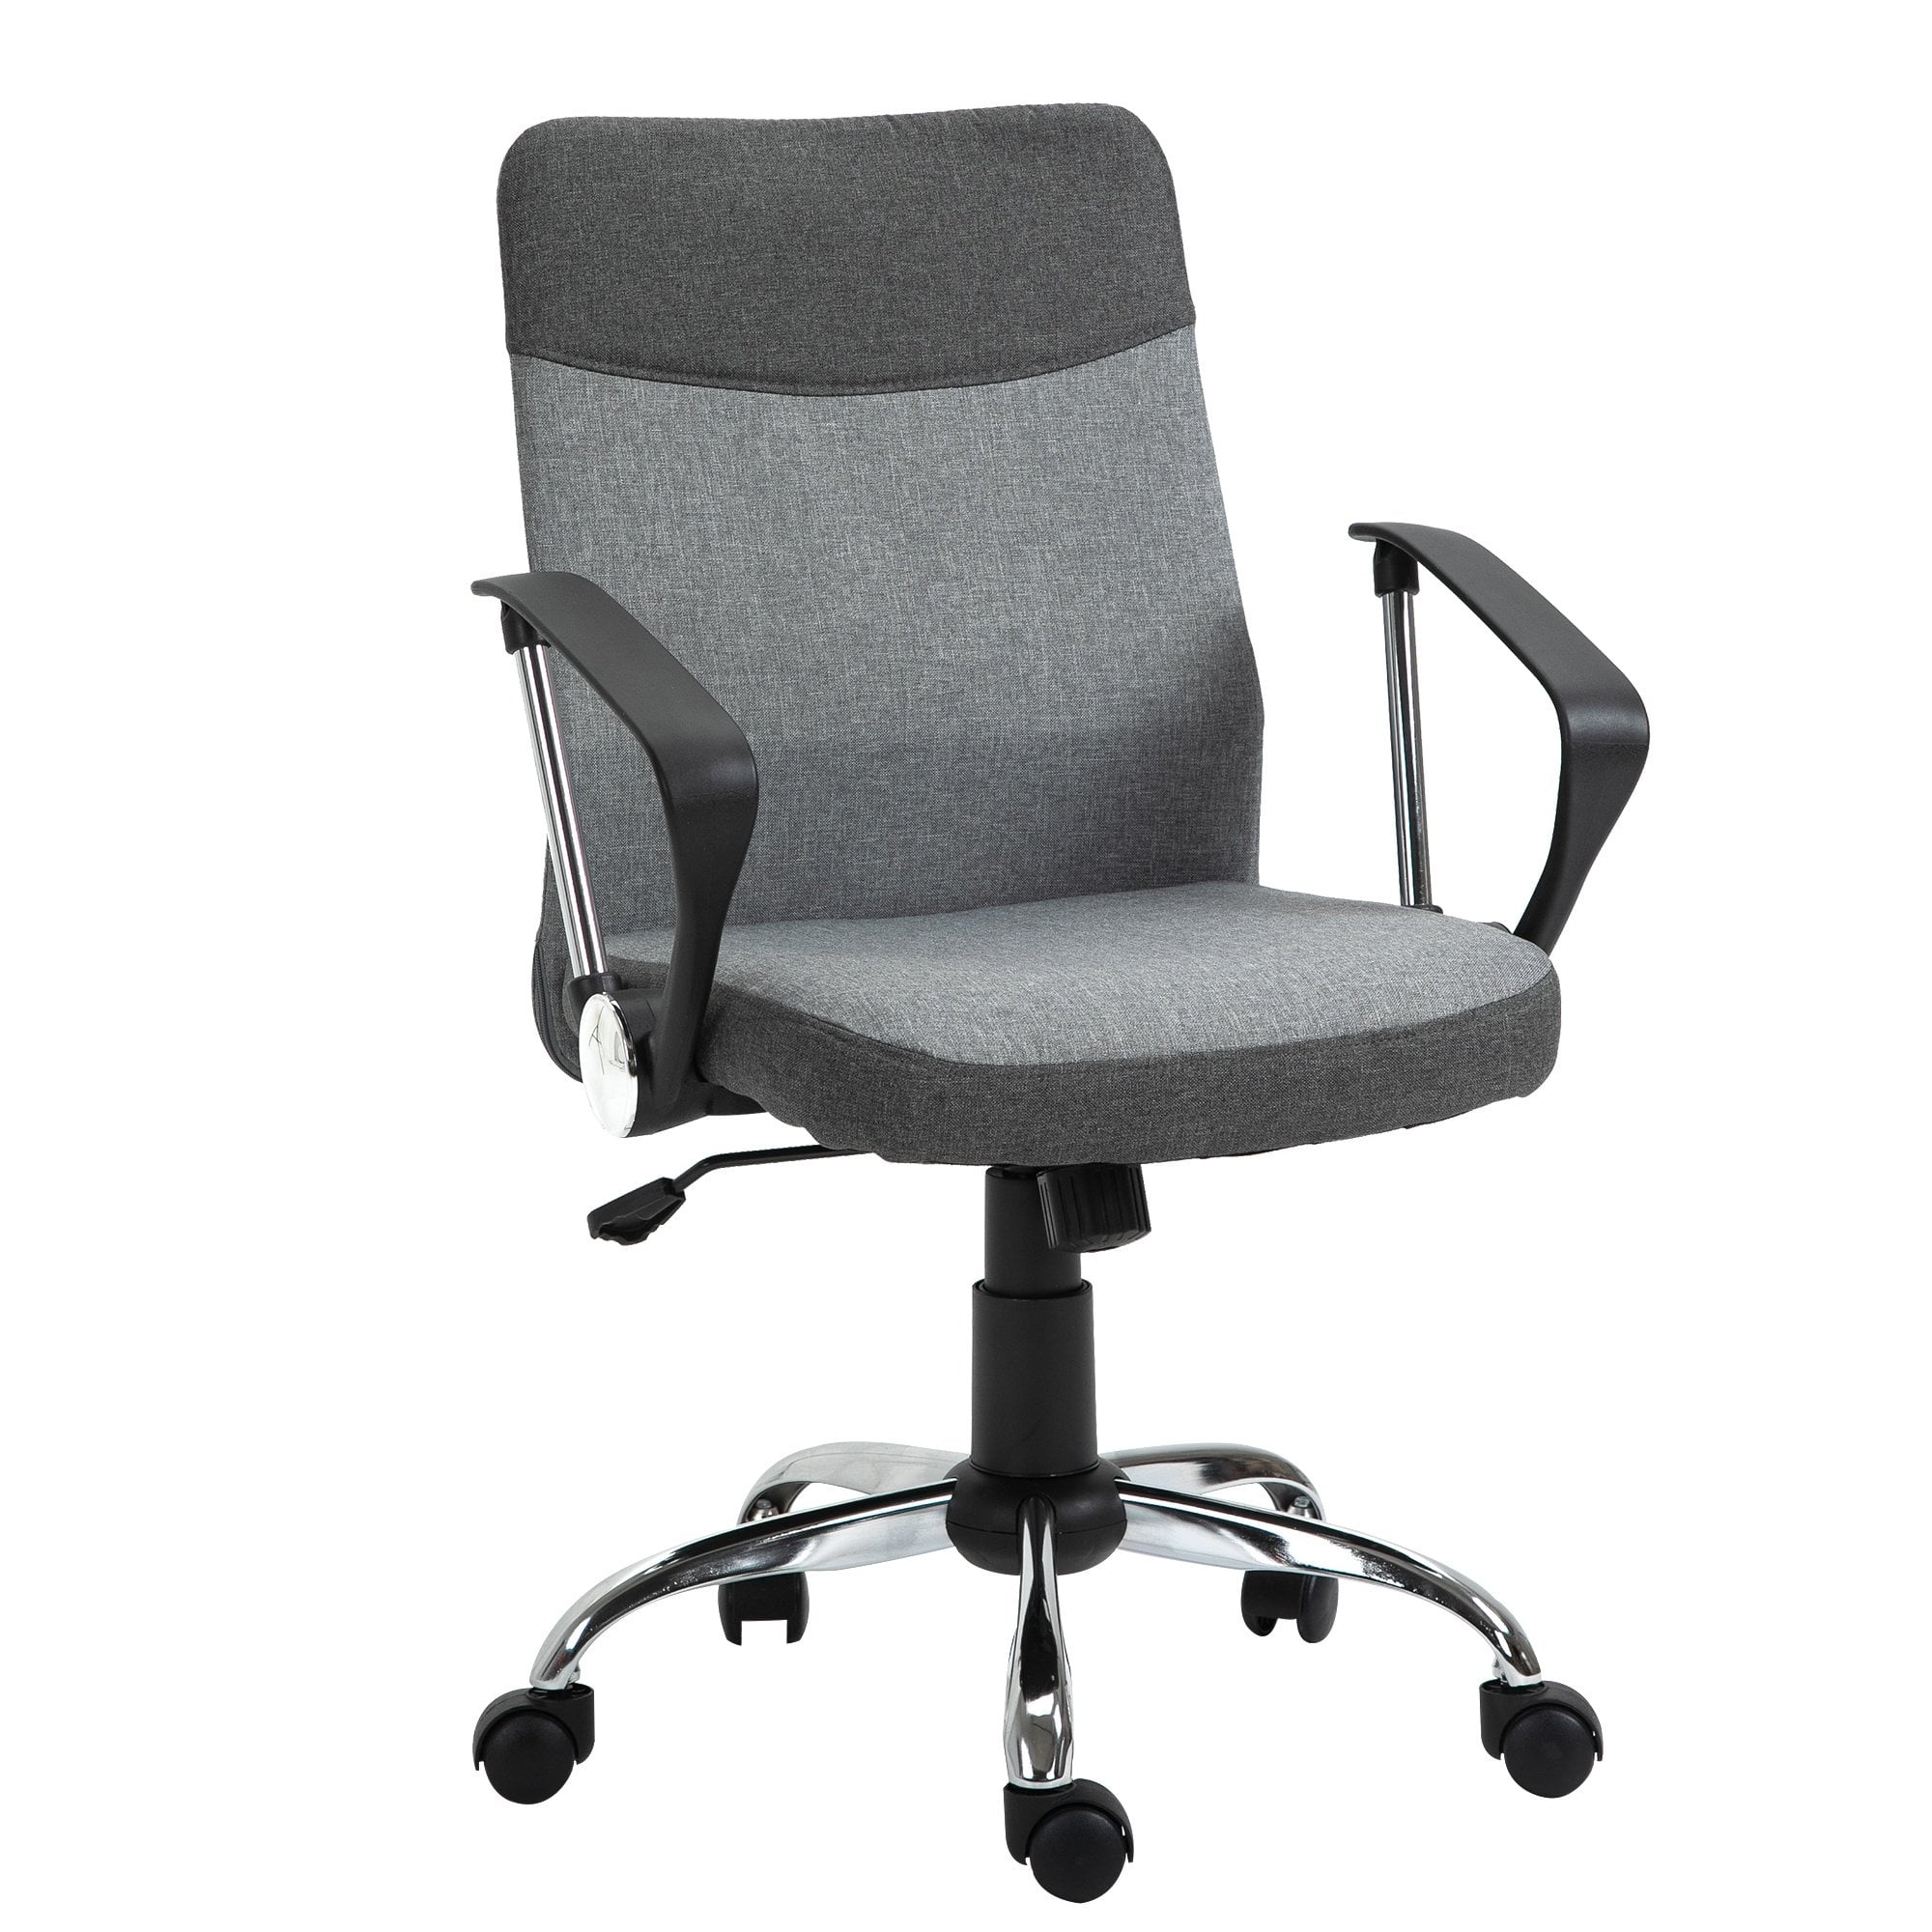 Vinsetto Office Chair Linen Fabric Swivel Computer Desk Chair Home Study Rocker with Wheels - Grey w/ Wheel - CARTER  | TJ Hughes